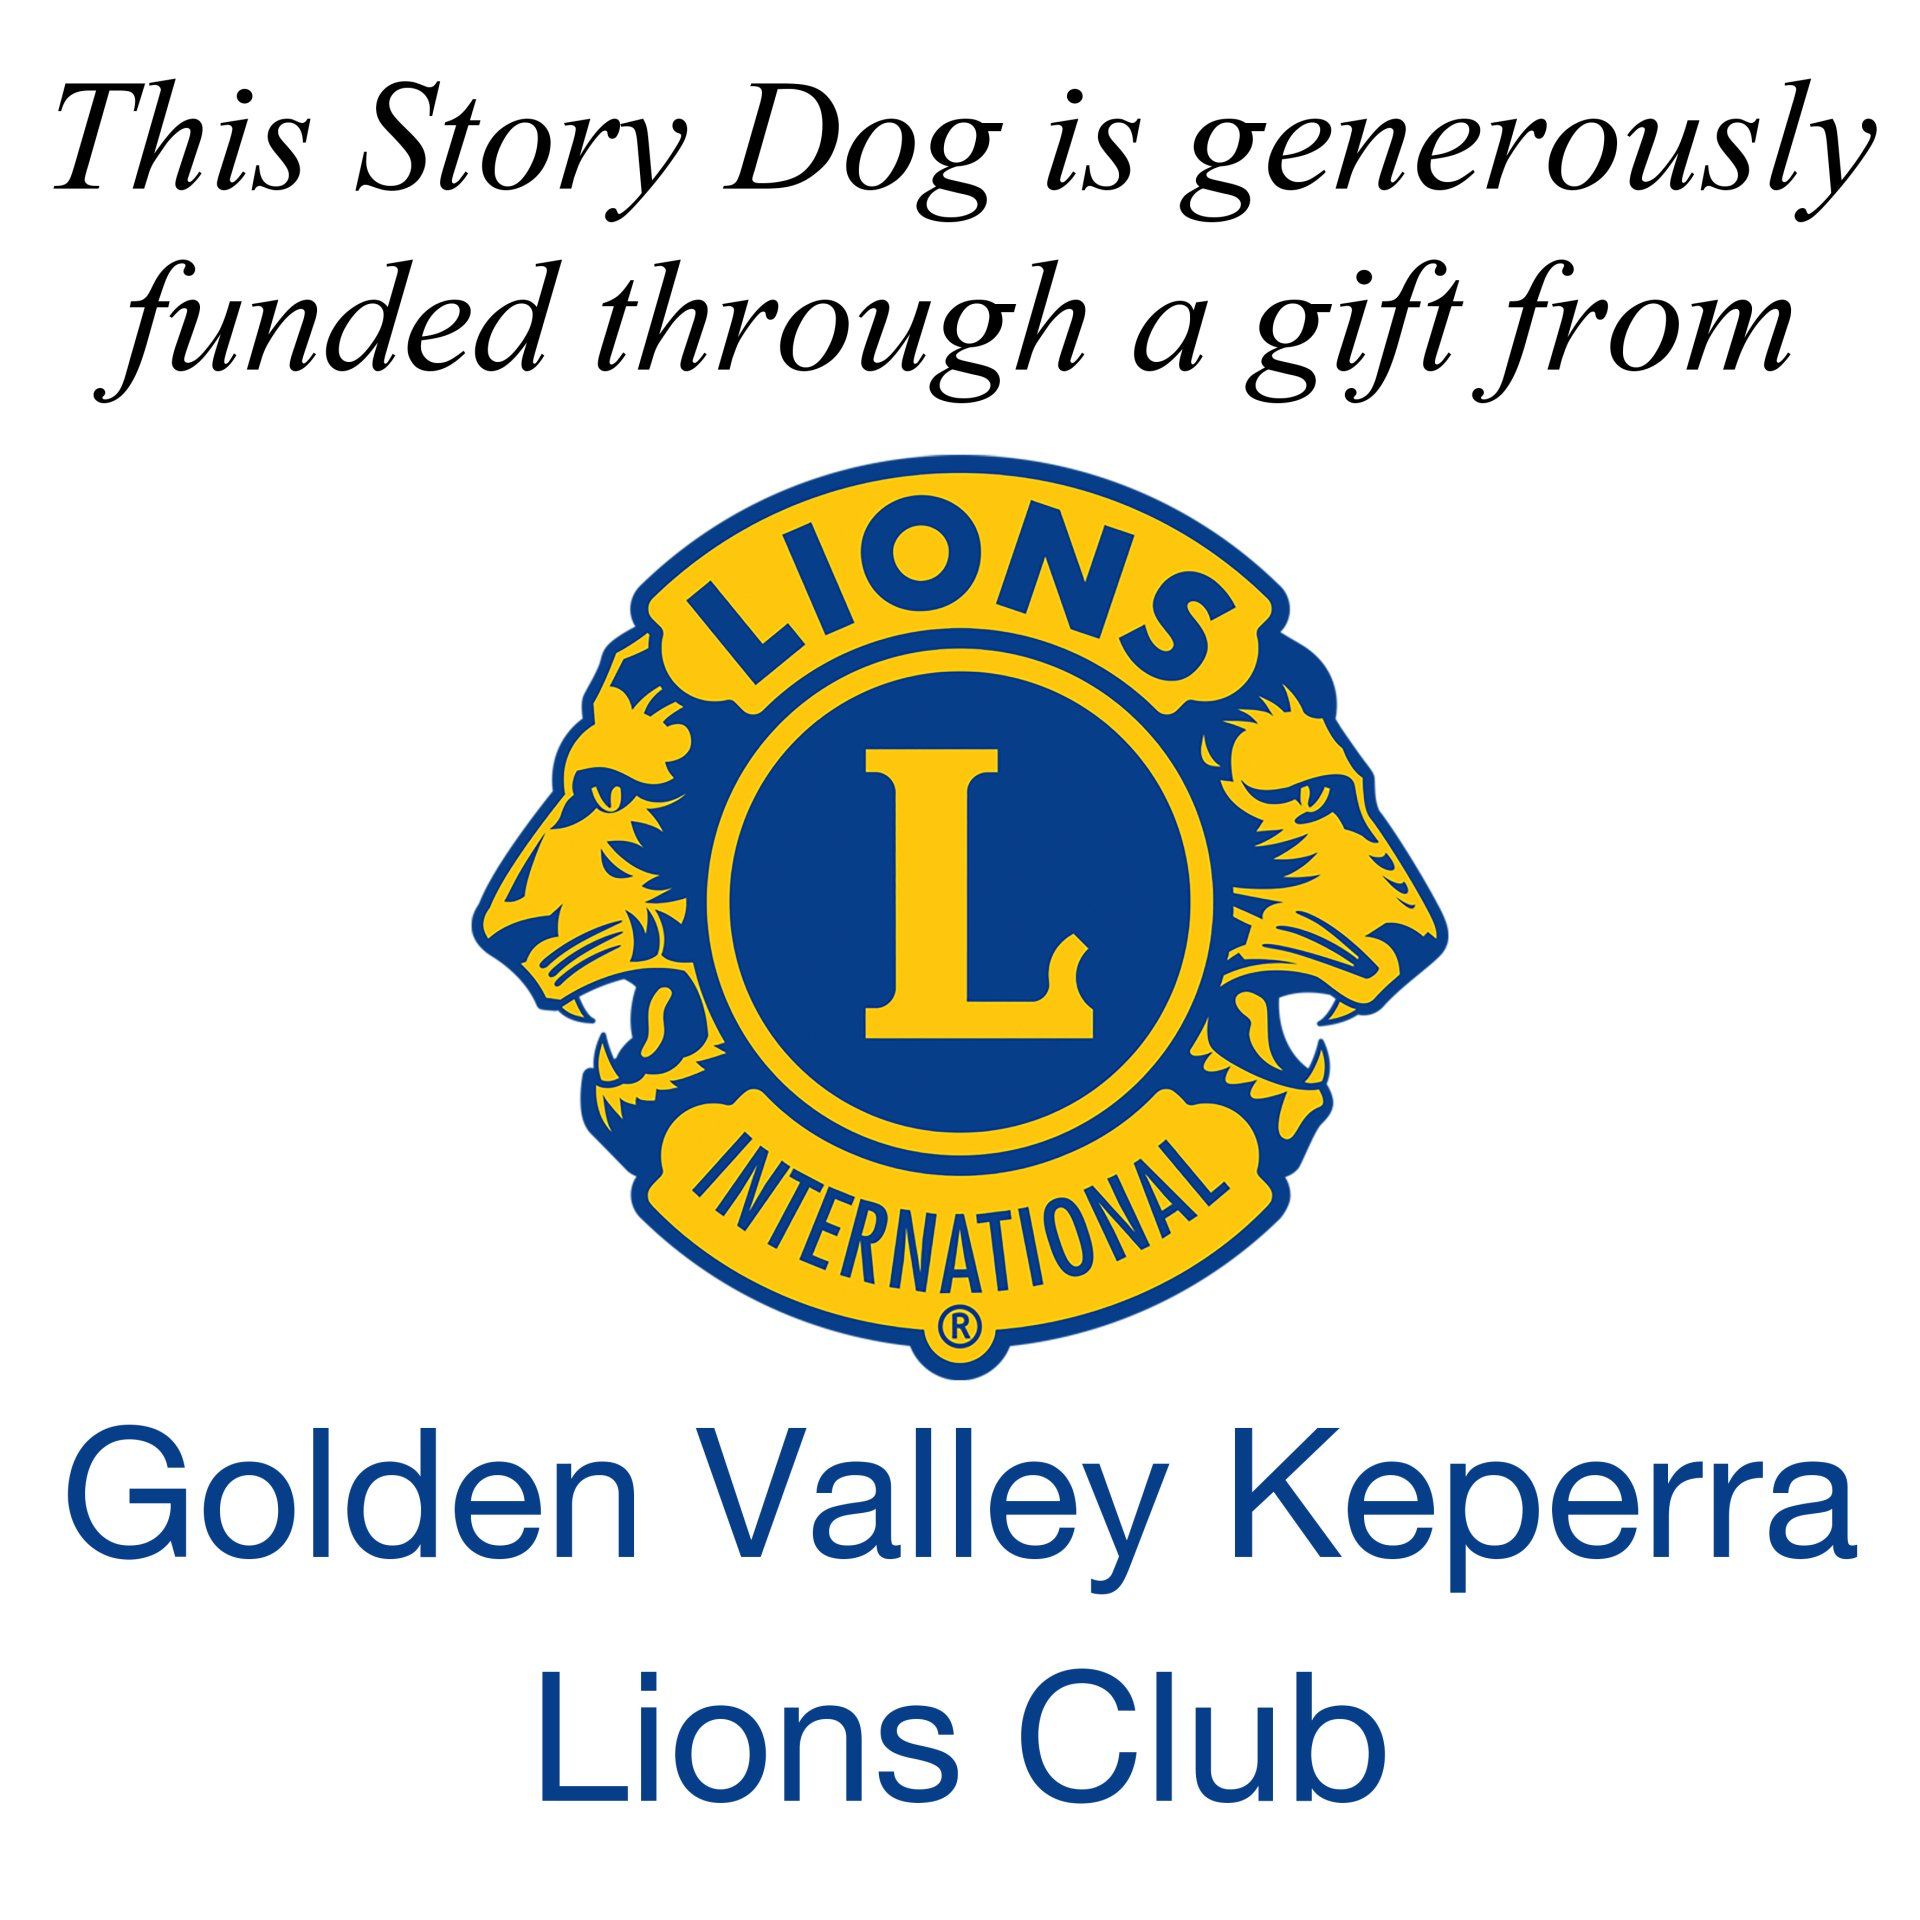 Lions Club of Golden Valley Keperra